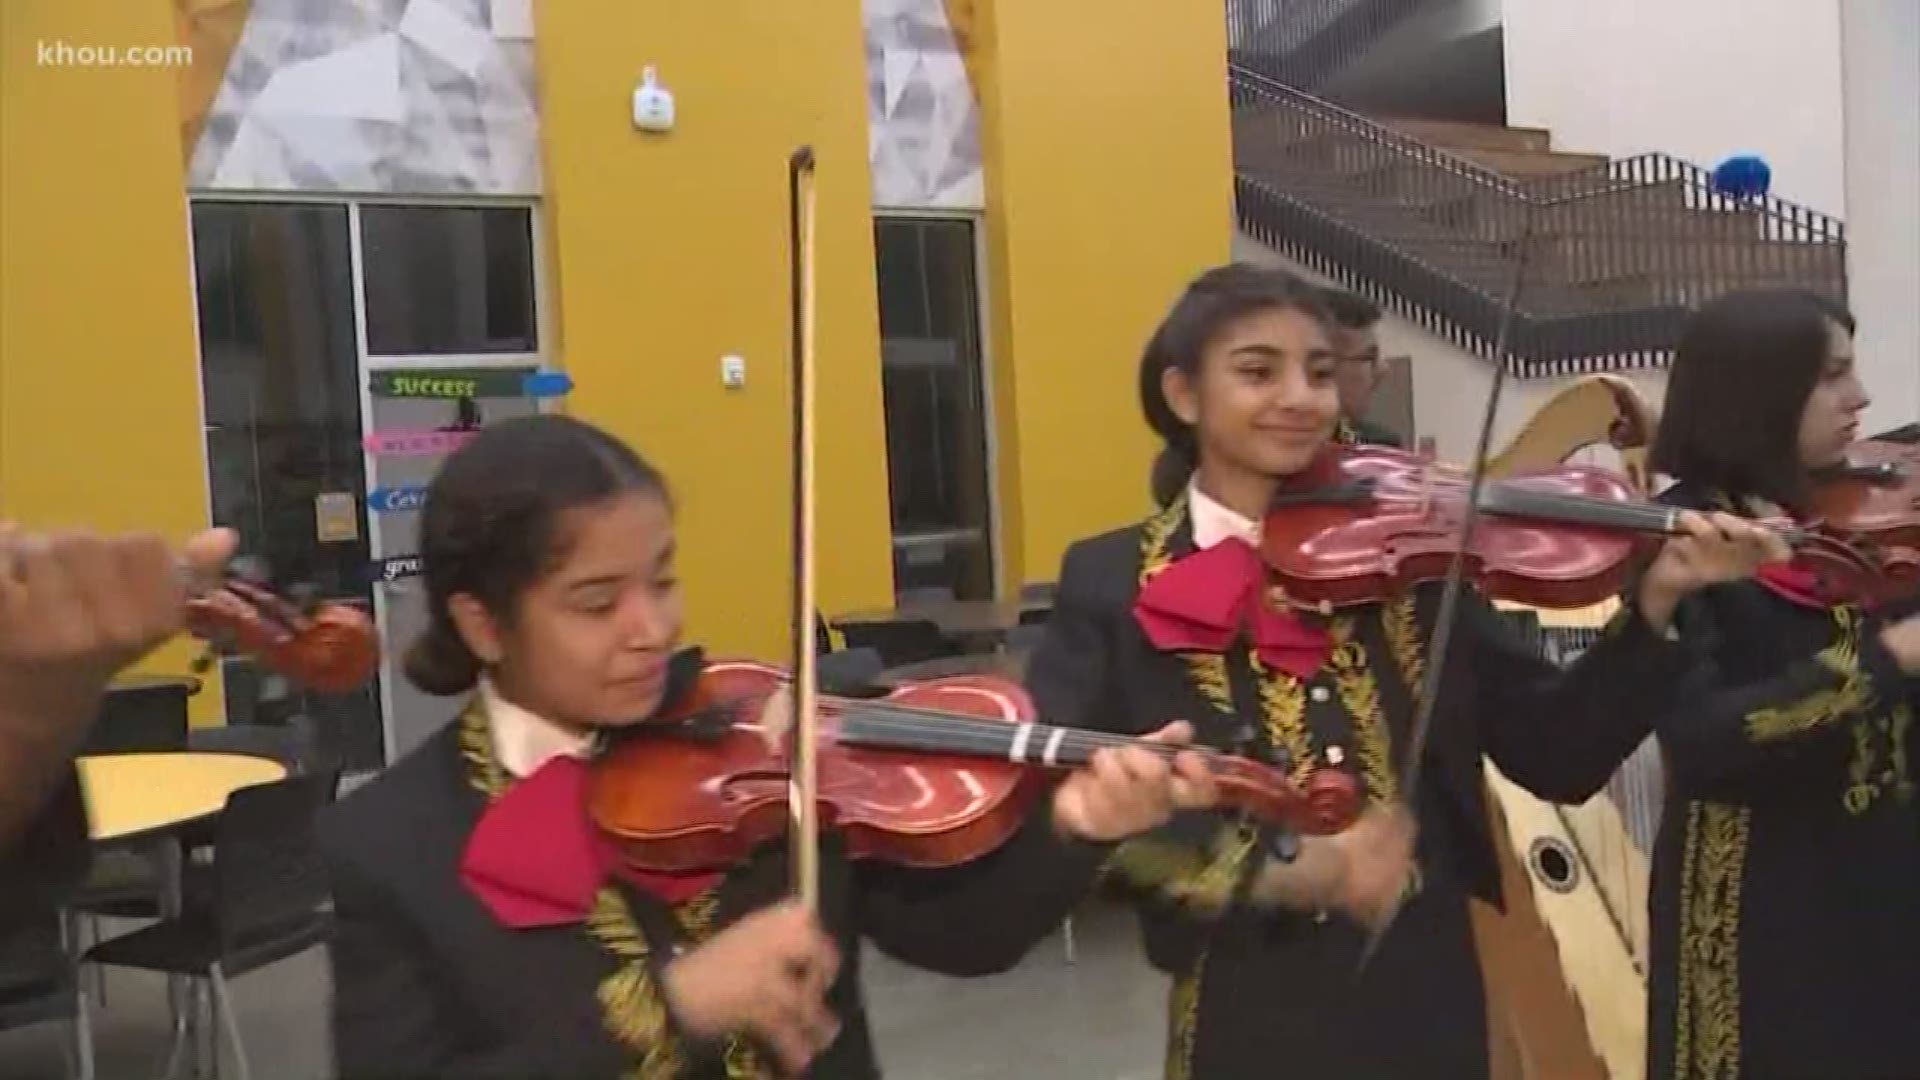 UH announced a new mariachi band called Mariachi Pumas debuts this fall and their looking for students to join.